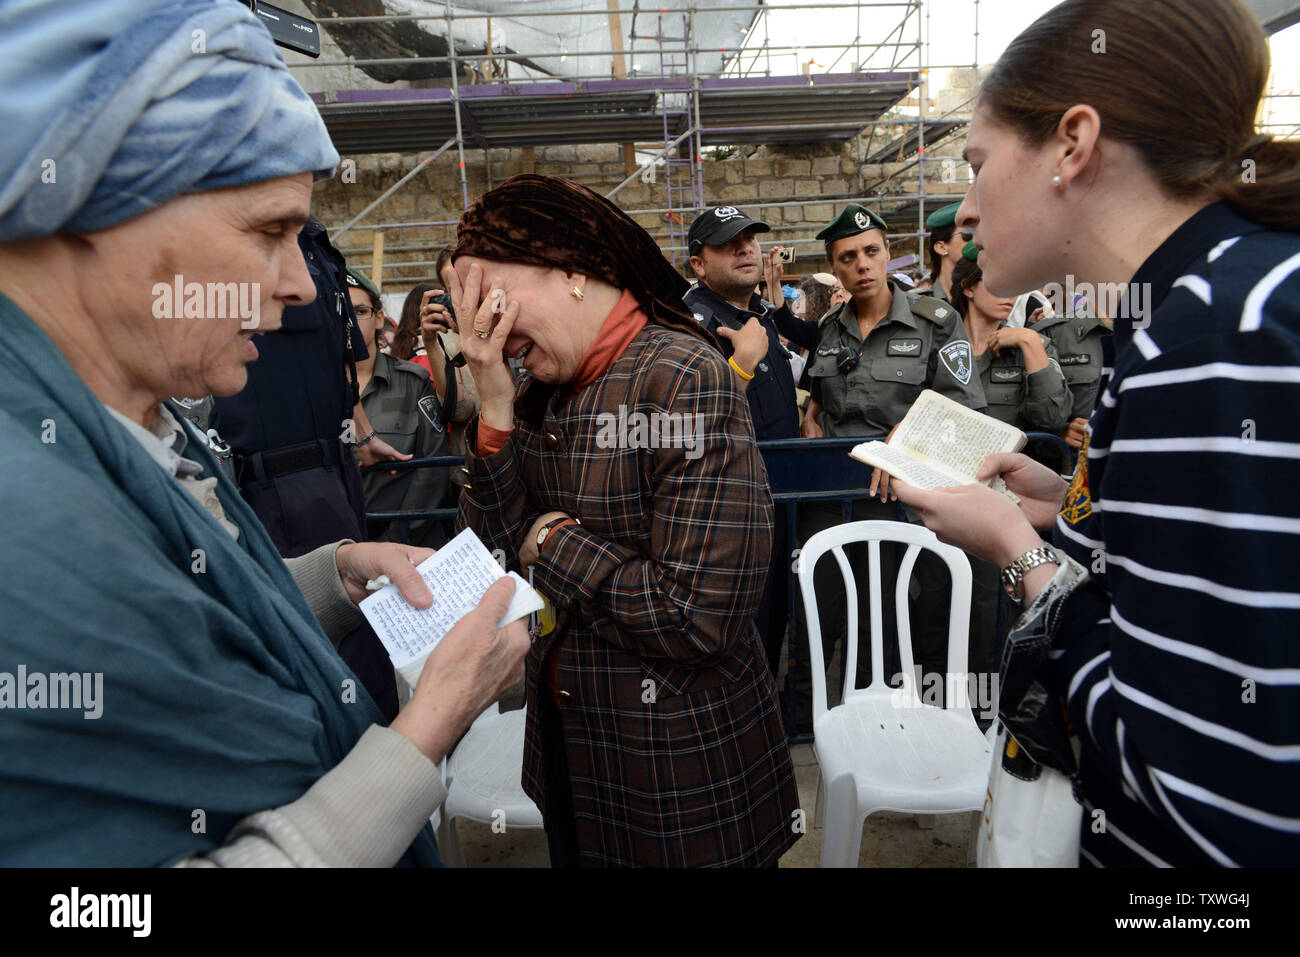 Ultra-Orthodox Jewish women pray and weep in a protest against members of the progressive Jewish organization Women of the Wall, while they pray wearing traditional religious items used only by men, at